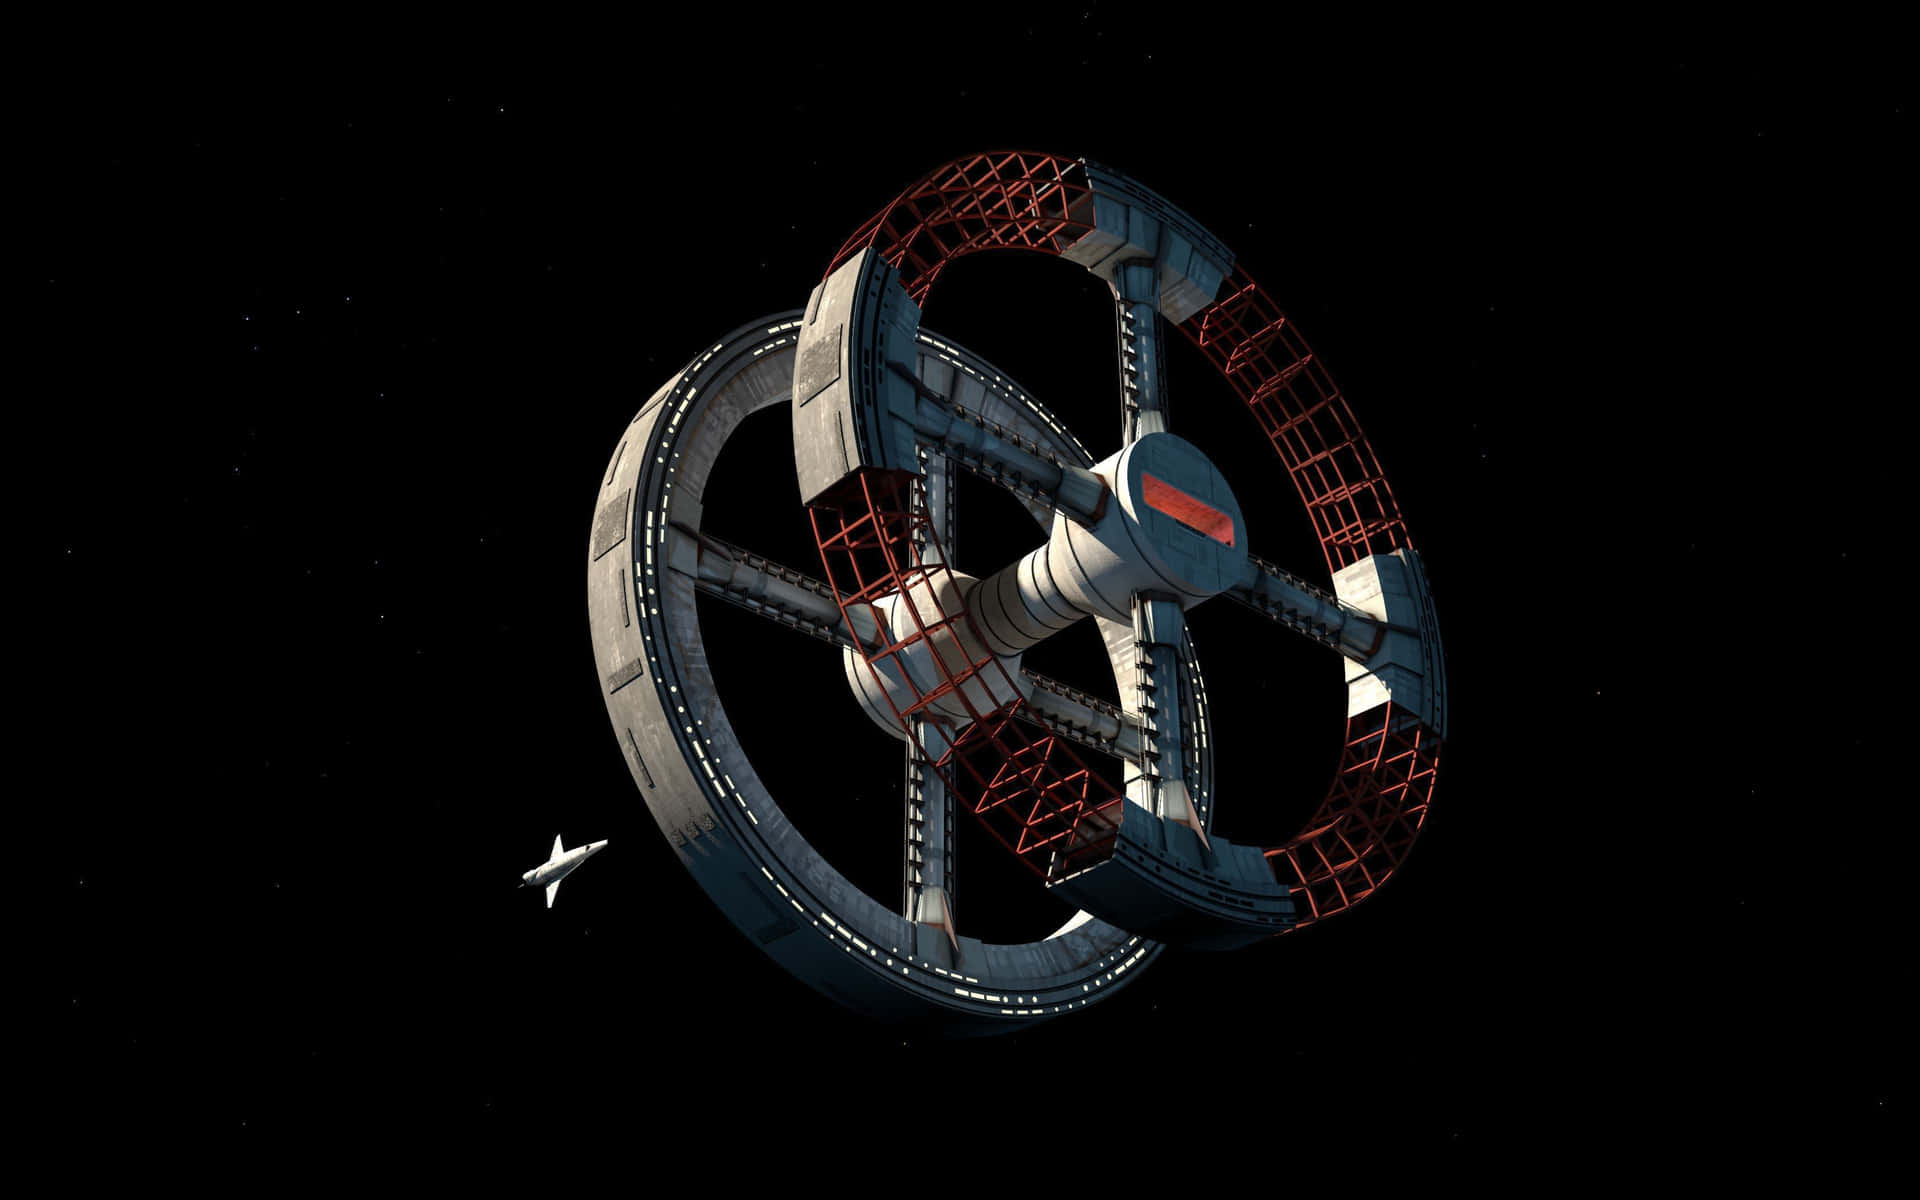 Journey beyond space and time in "2001: A Space Odyssey" Wallpaper